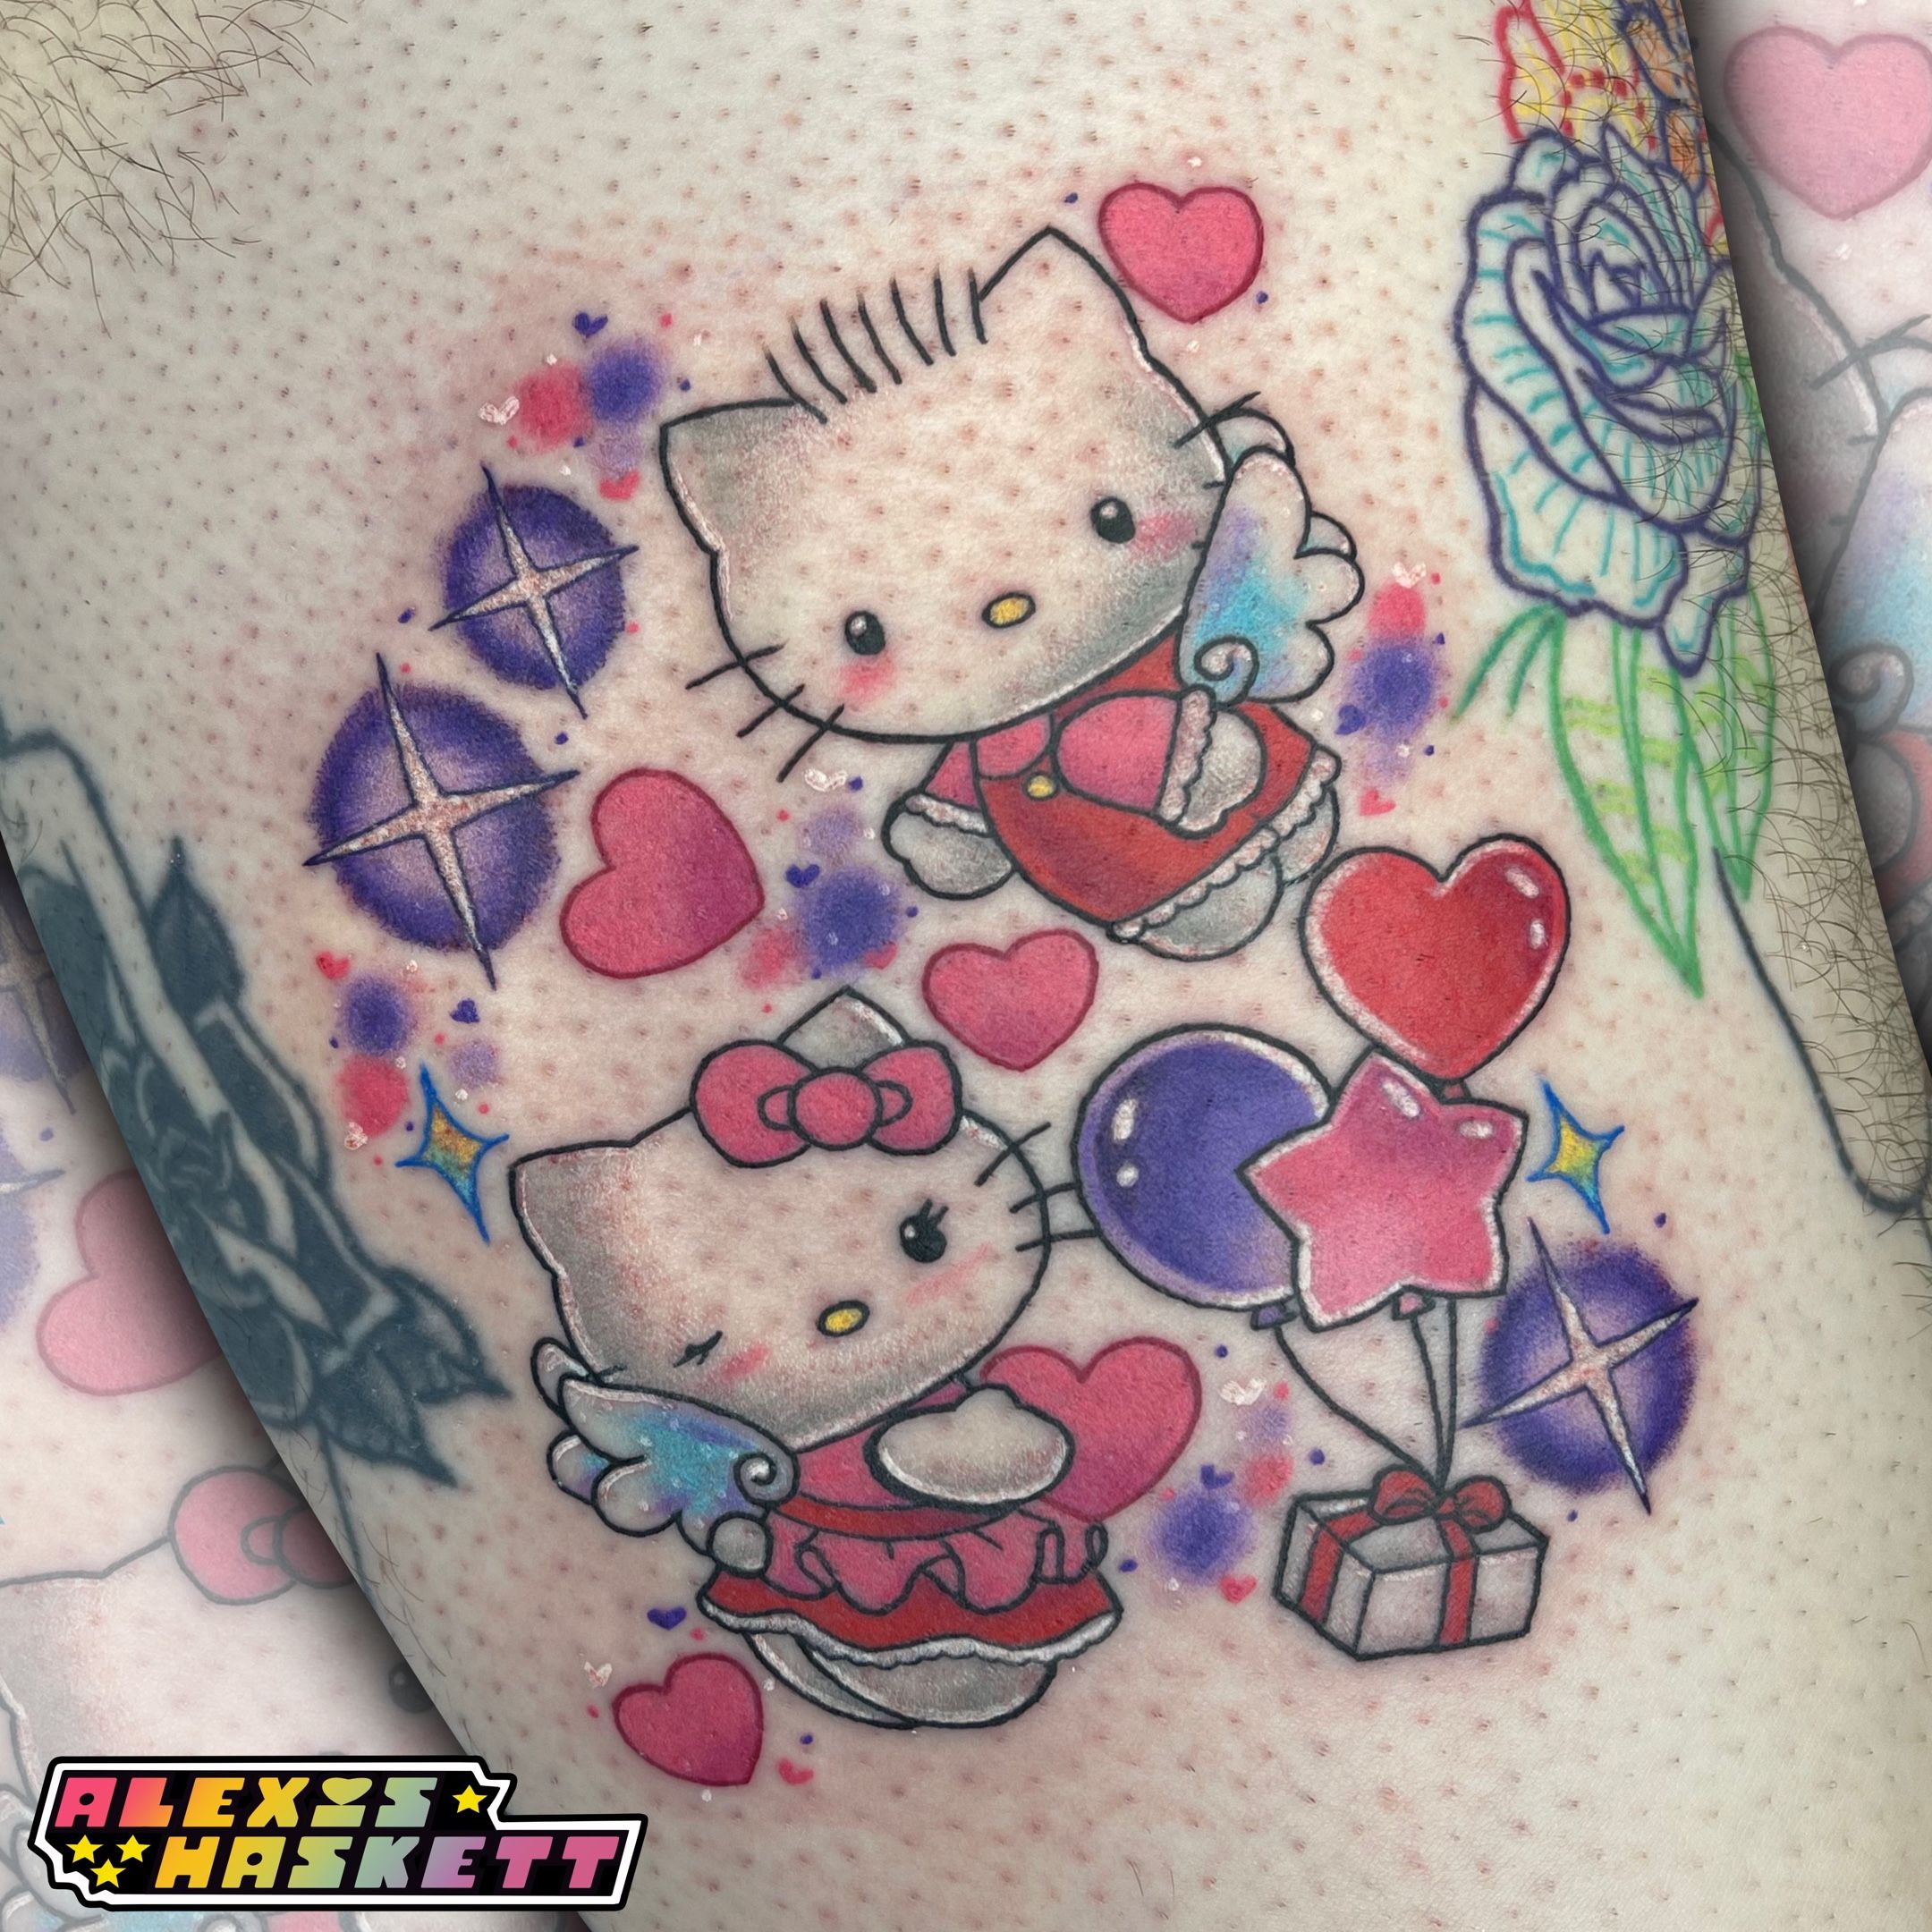 LEX outsider pop SuRReal tattoo Print gothic Hello Kitty iNked Sanrio painting 